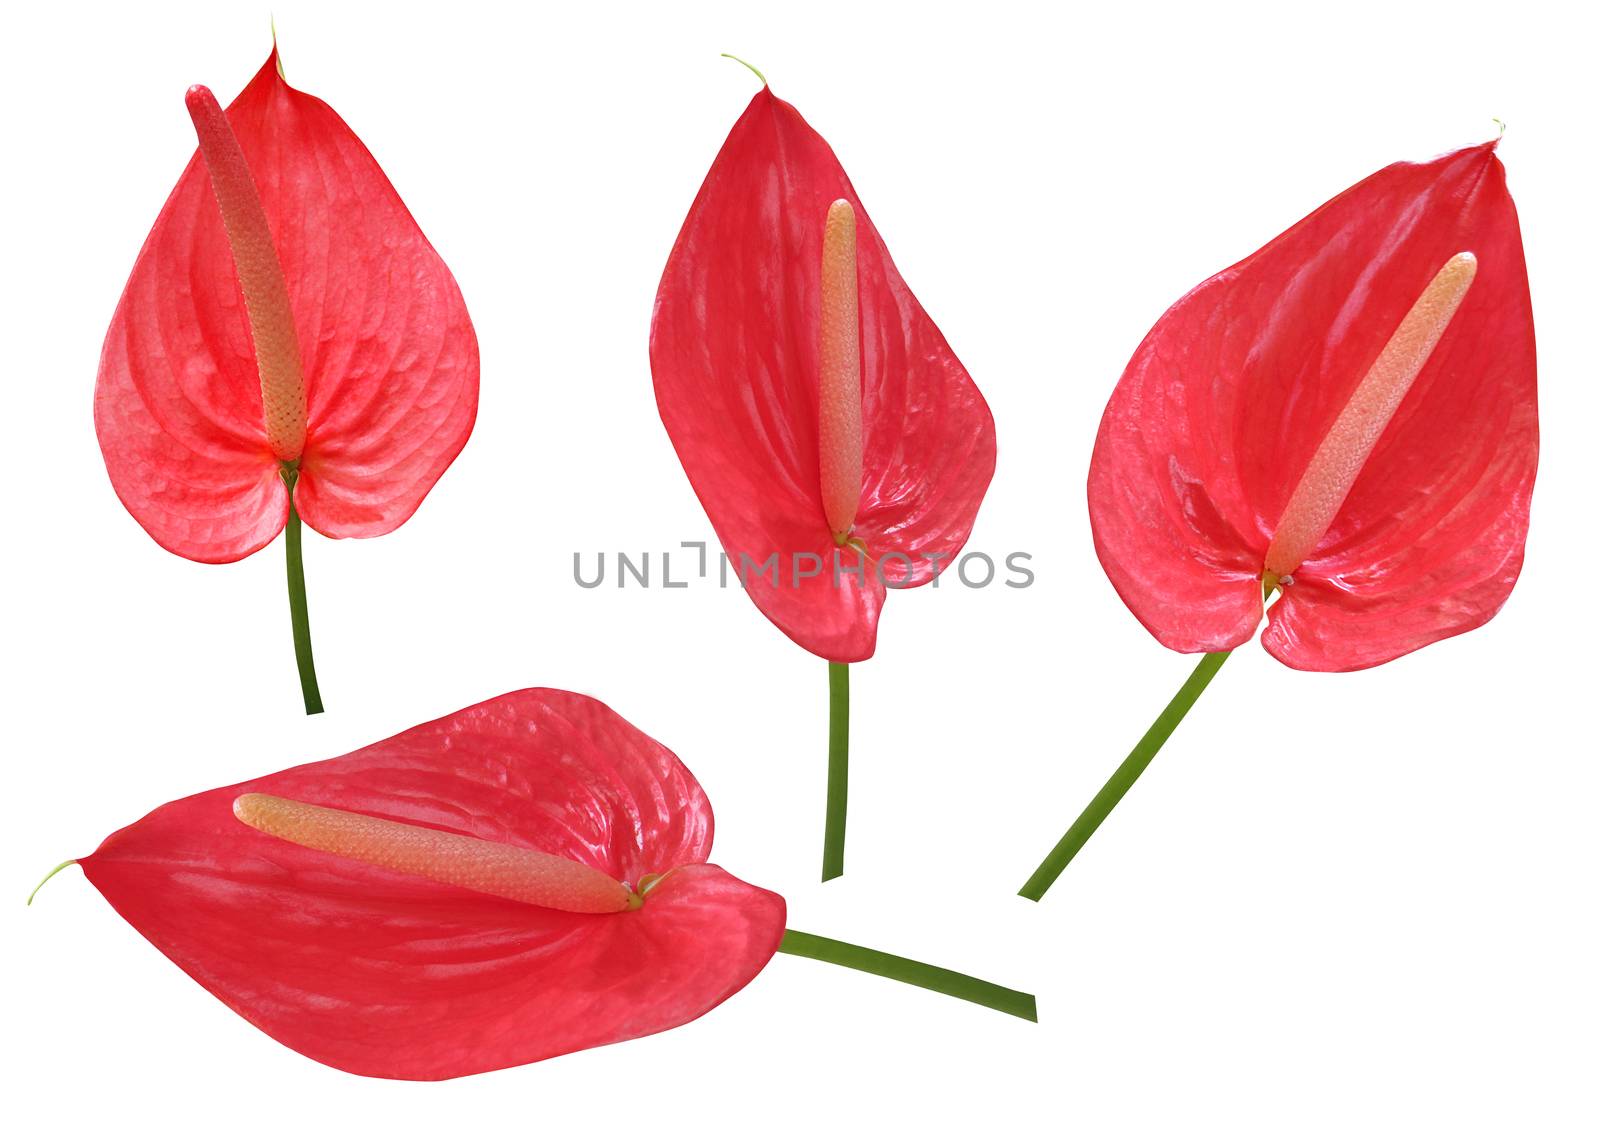 Red Anthurium flowers isolated on a white background